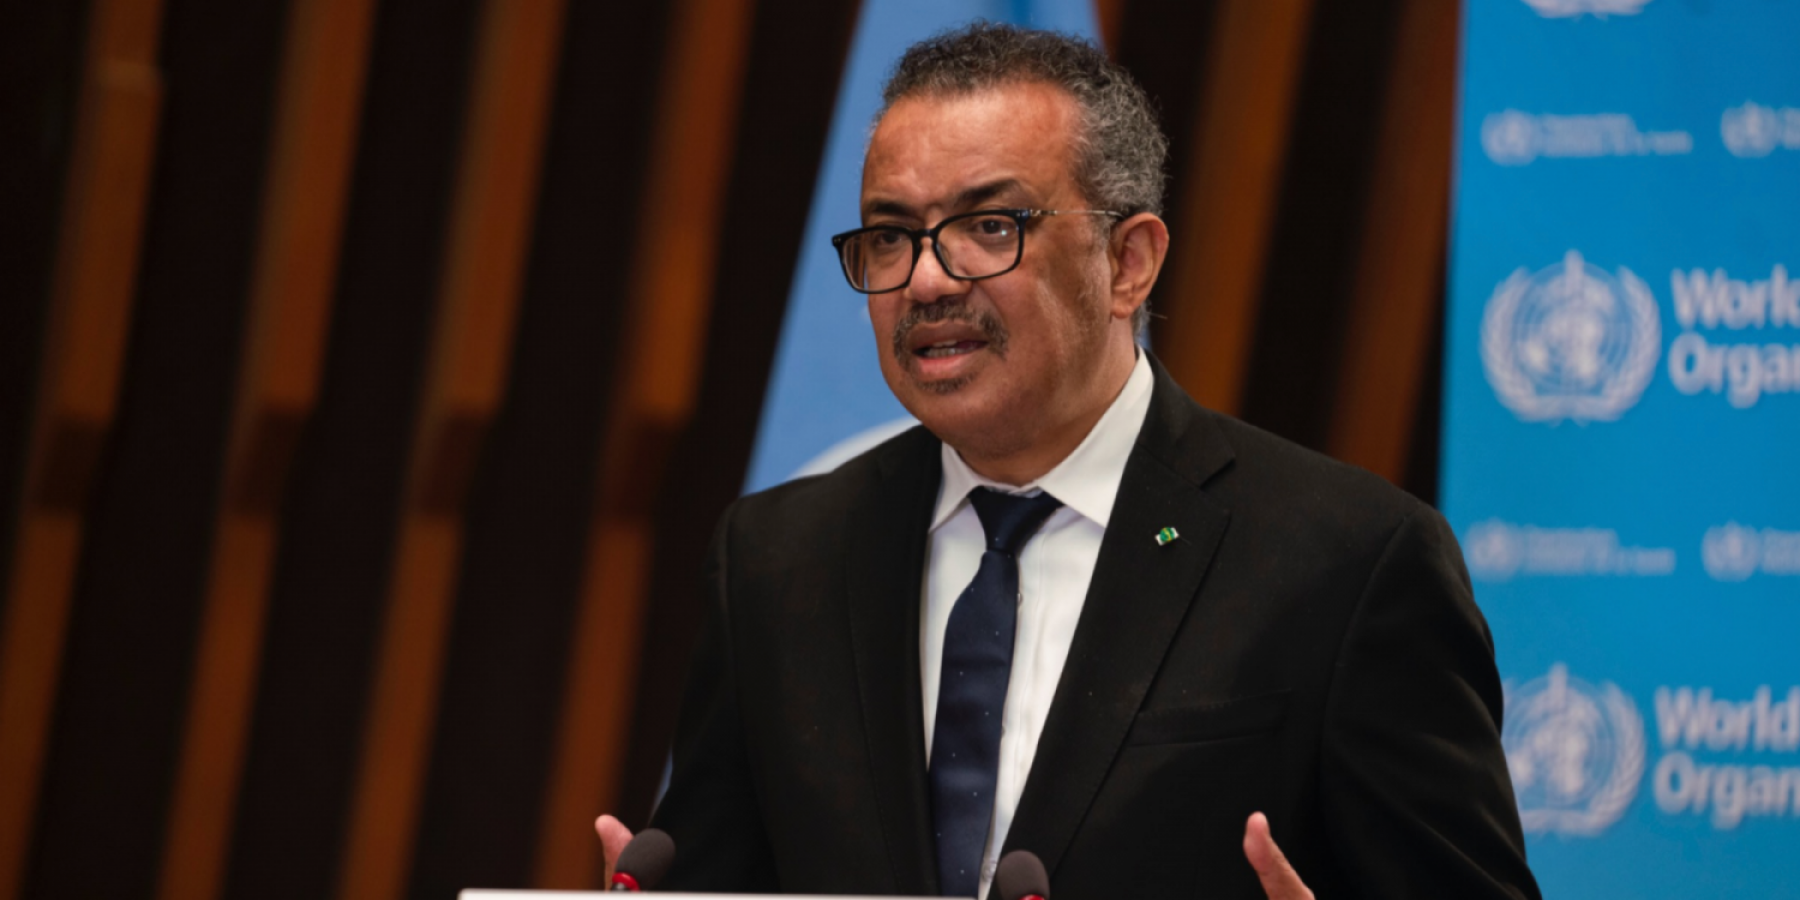 WHO, EB, Dr Tedros.png